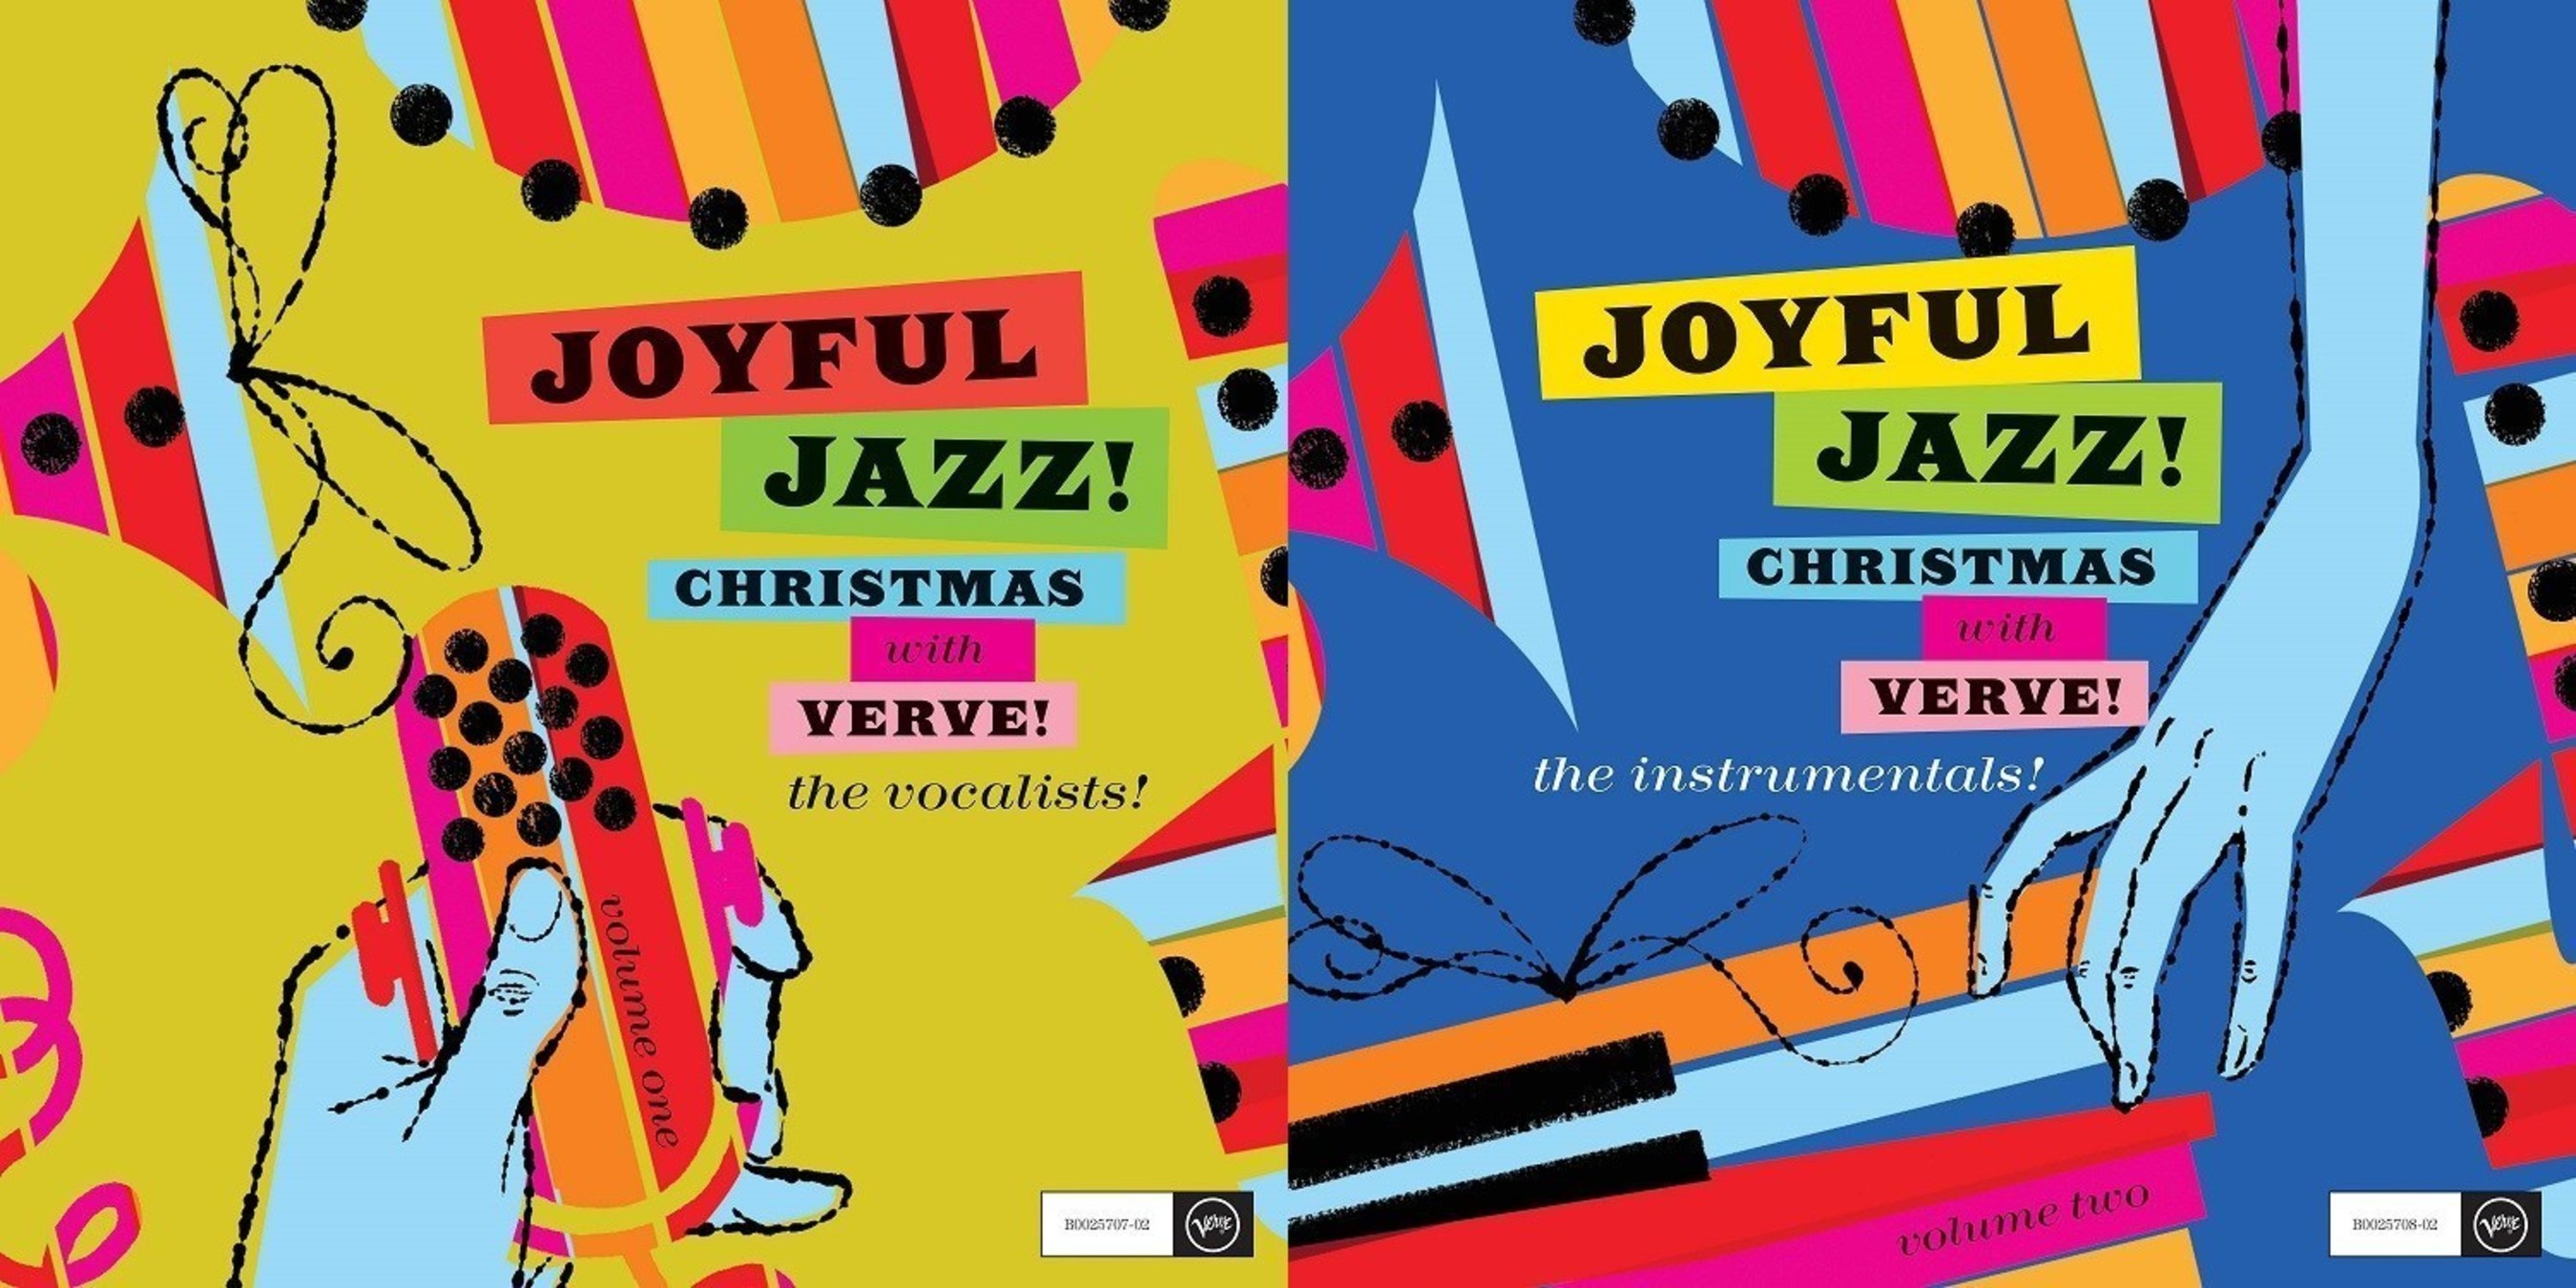 Verve is proud to celebrate the holidays with two heartwarming Christmas releases - 'Joyful Jazz! Christmas with Verve, Vol. 1: The Vocalists,' and Joyful Jazz! Christmas with Verve, Vol. 2: The Instrumentals,' on October 21. The collections feature tracks across five decades from some of the finest vocalists and instrumentalists from Universal Music's family of labels including Verve, Blue Note, Impulse!, Decca, GRP, Cadet, Argo, and more.